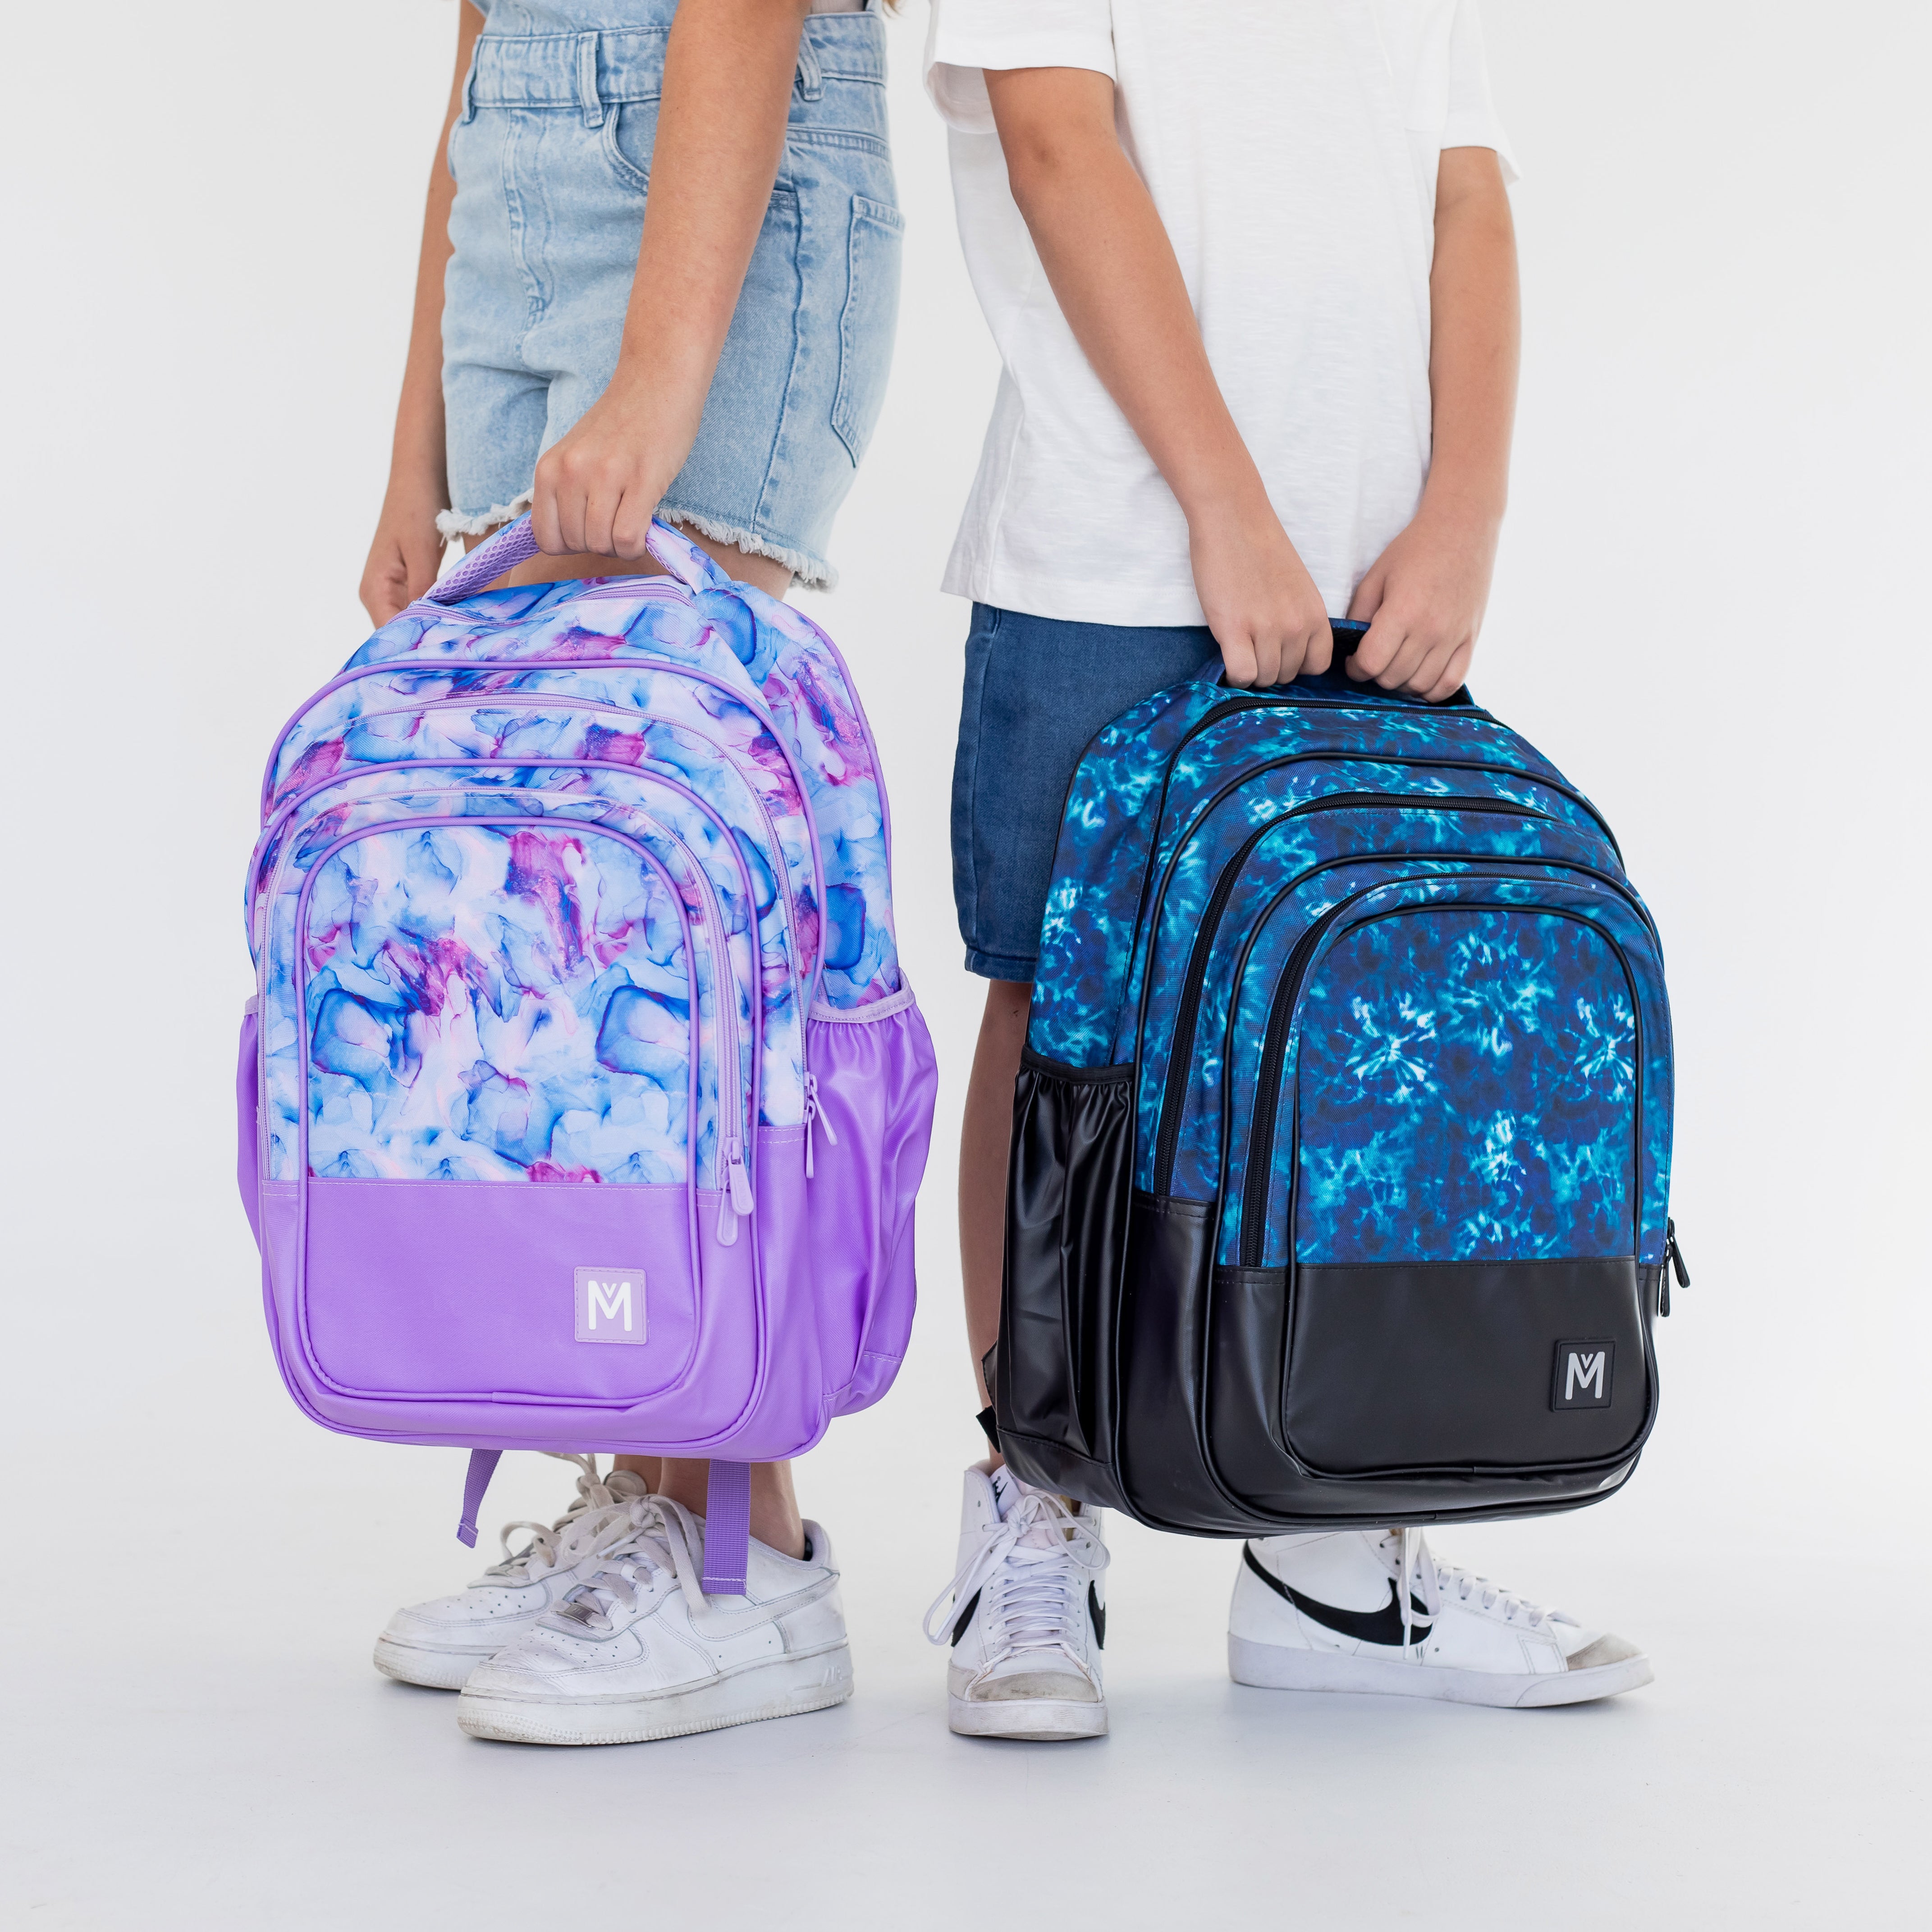 Backpacks and Lunch bags